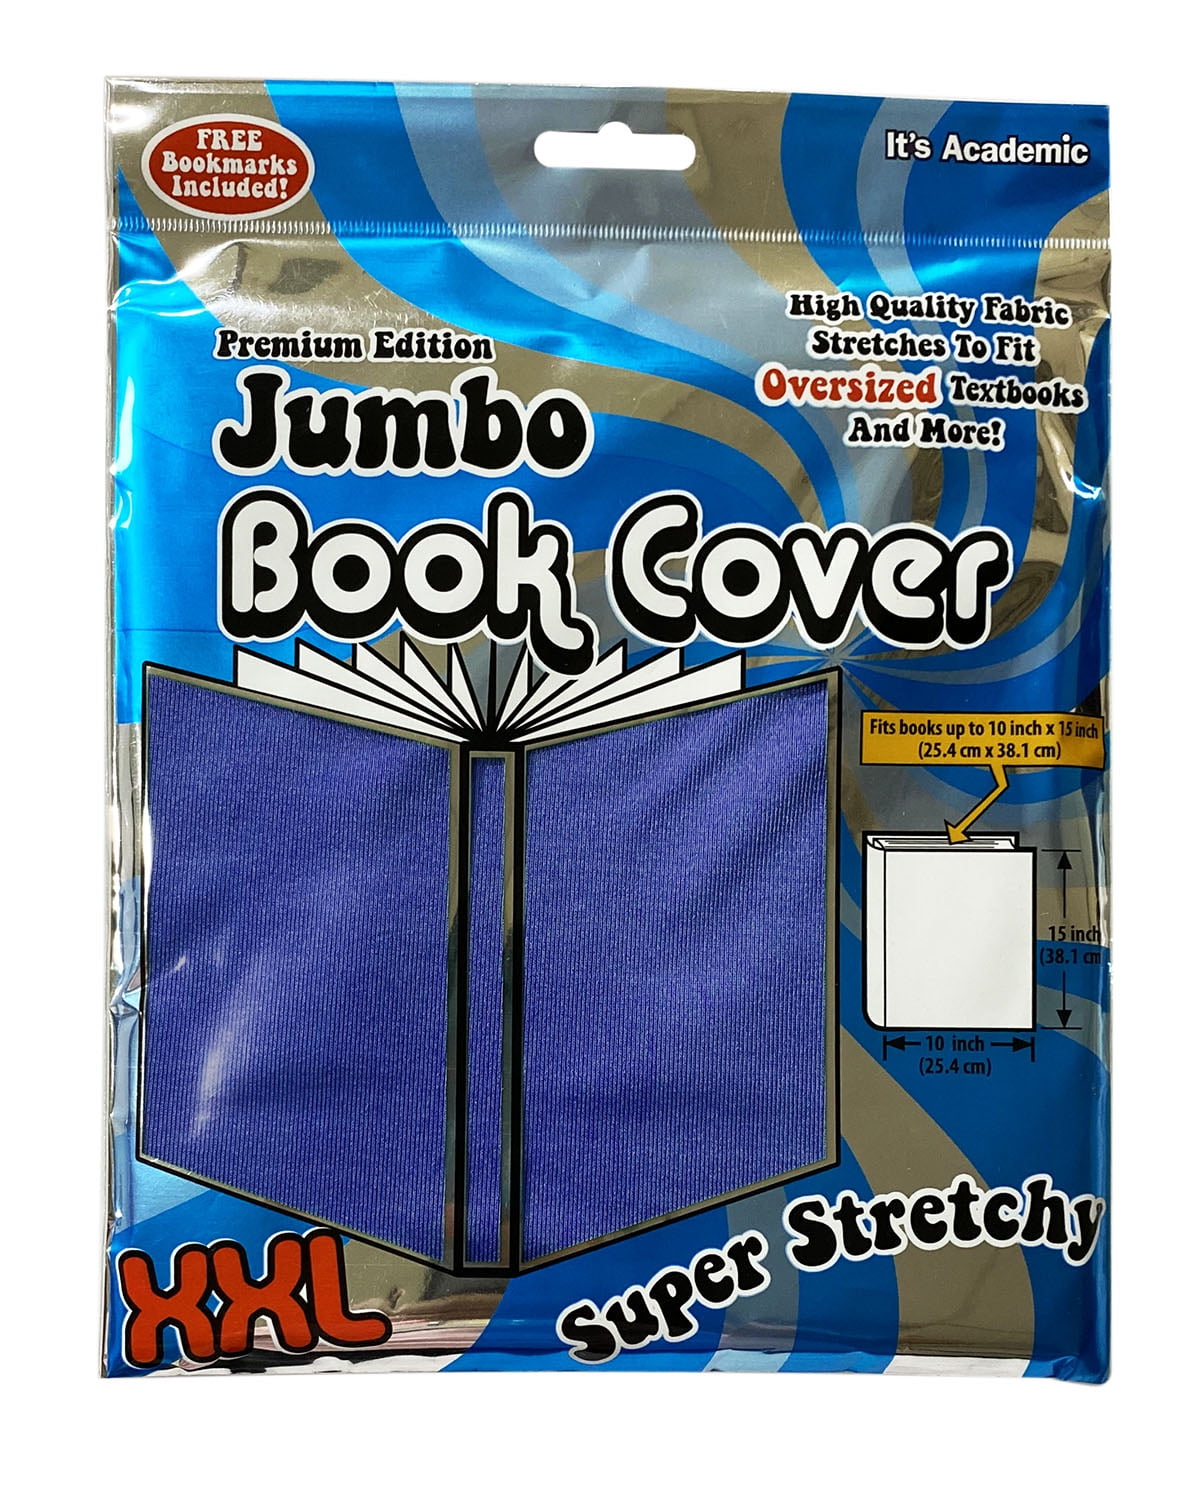 It's Academic Fabric Stretchable Book Cover Washable Fits Up To 8" x 10" *New 